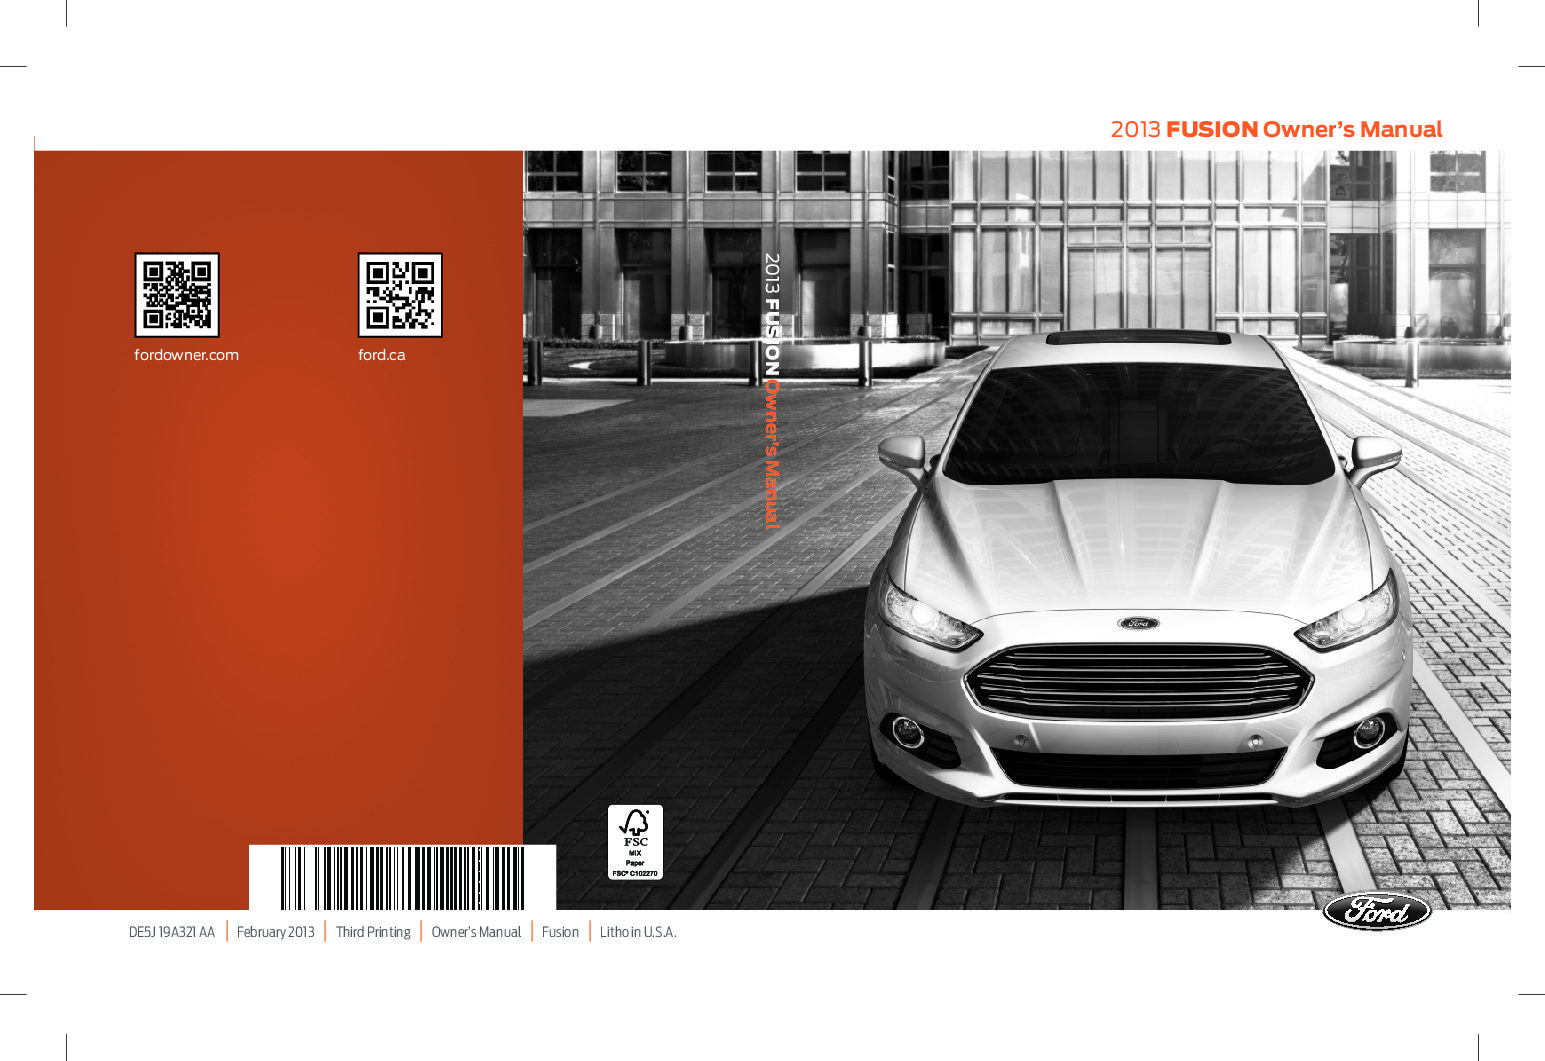 2003 ford fusion workshop manual free download pc